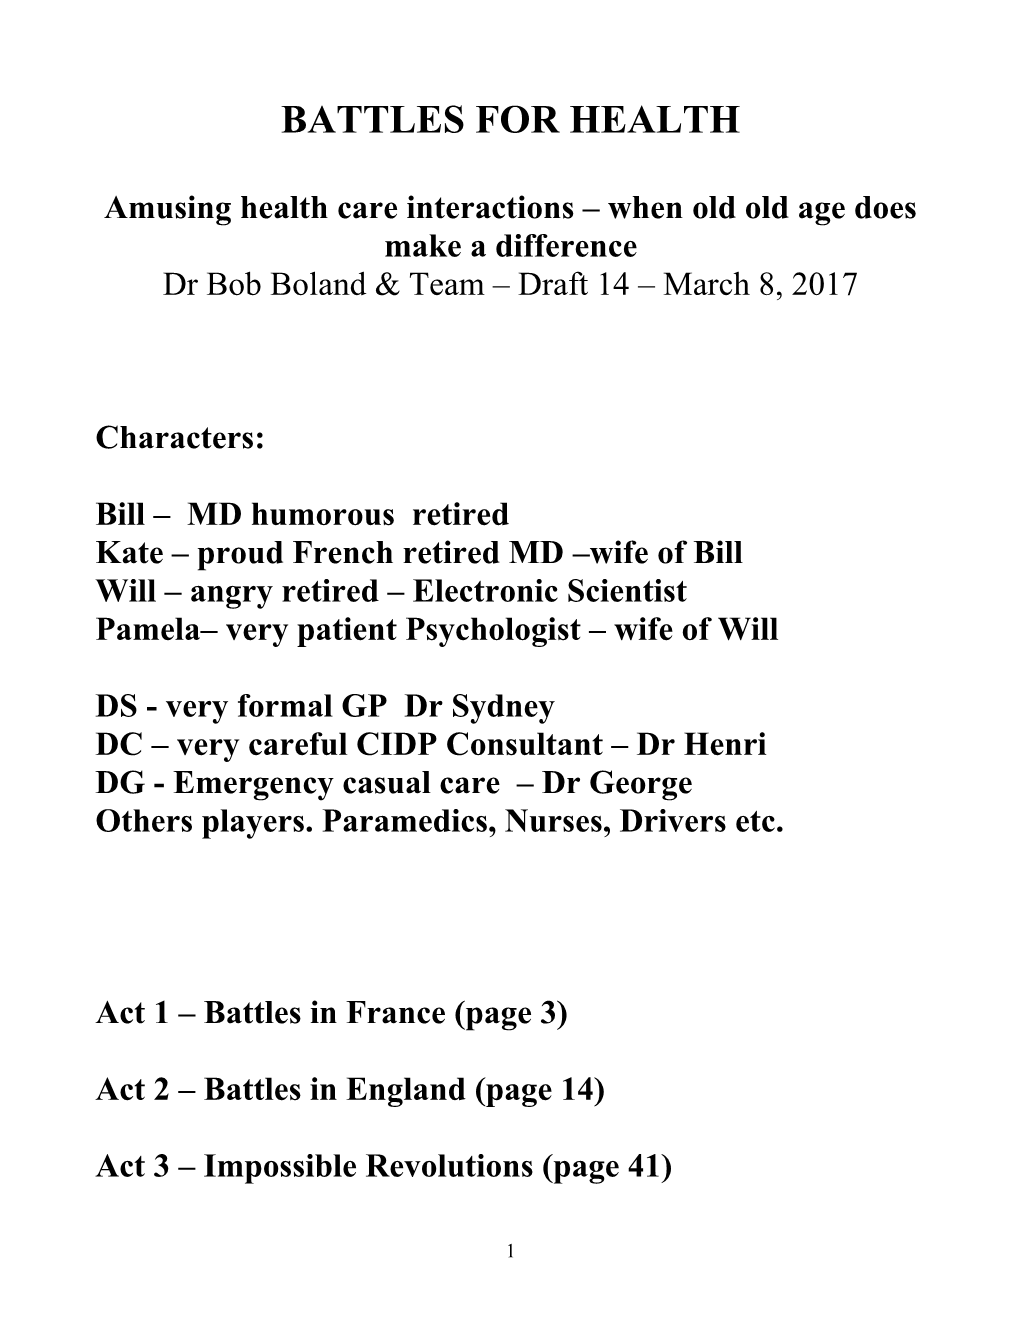 Experiences in the Health Services of France and Britain